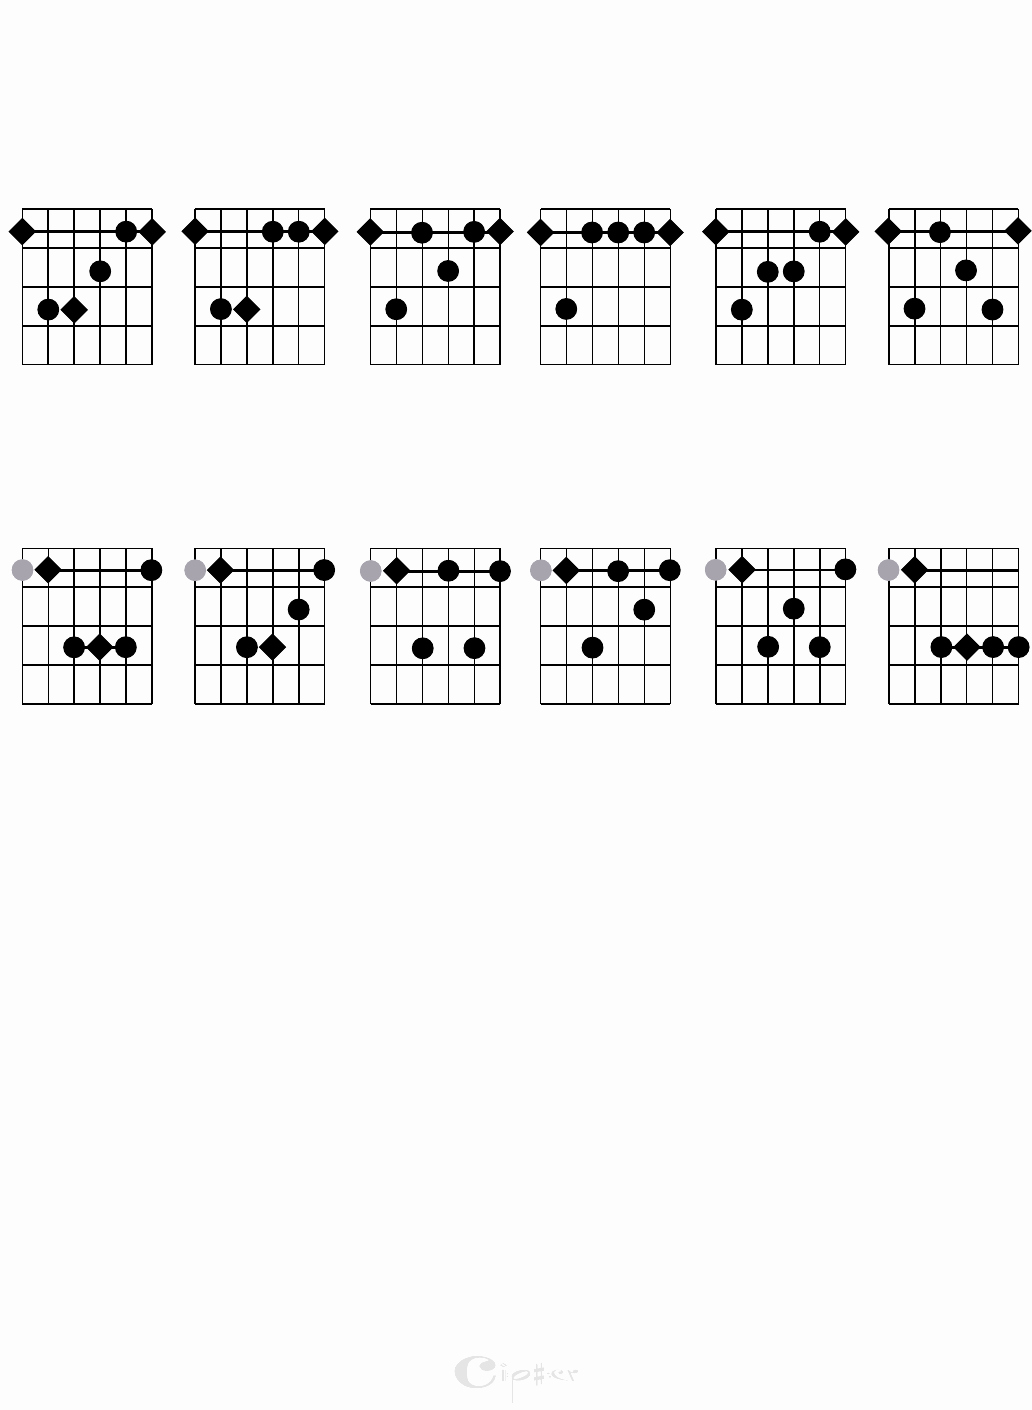 Complete Guitar Chord Charts Best Of Download Sample Plete Guitar Chord Chart for Beginner